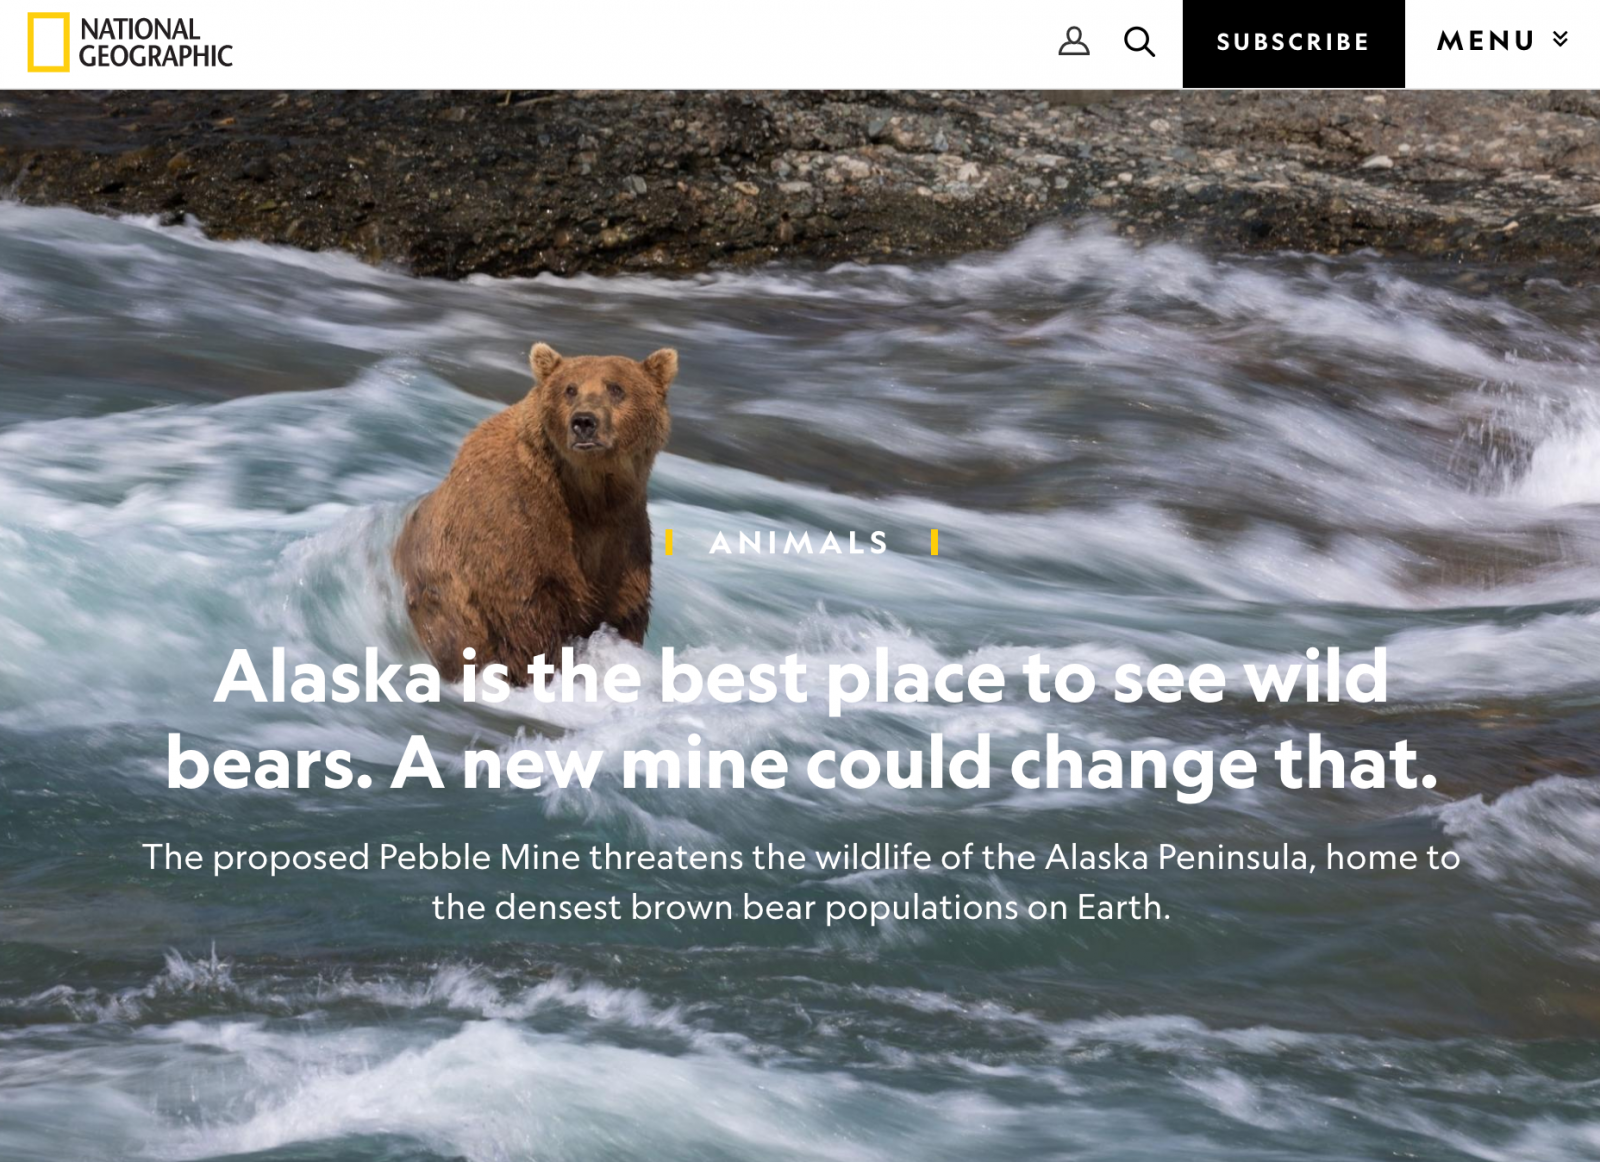 Alaskan Brown Bears Threatened By Mine "“ on National Geographic